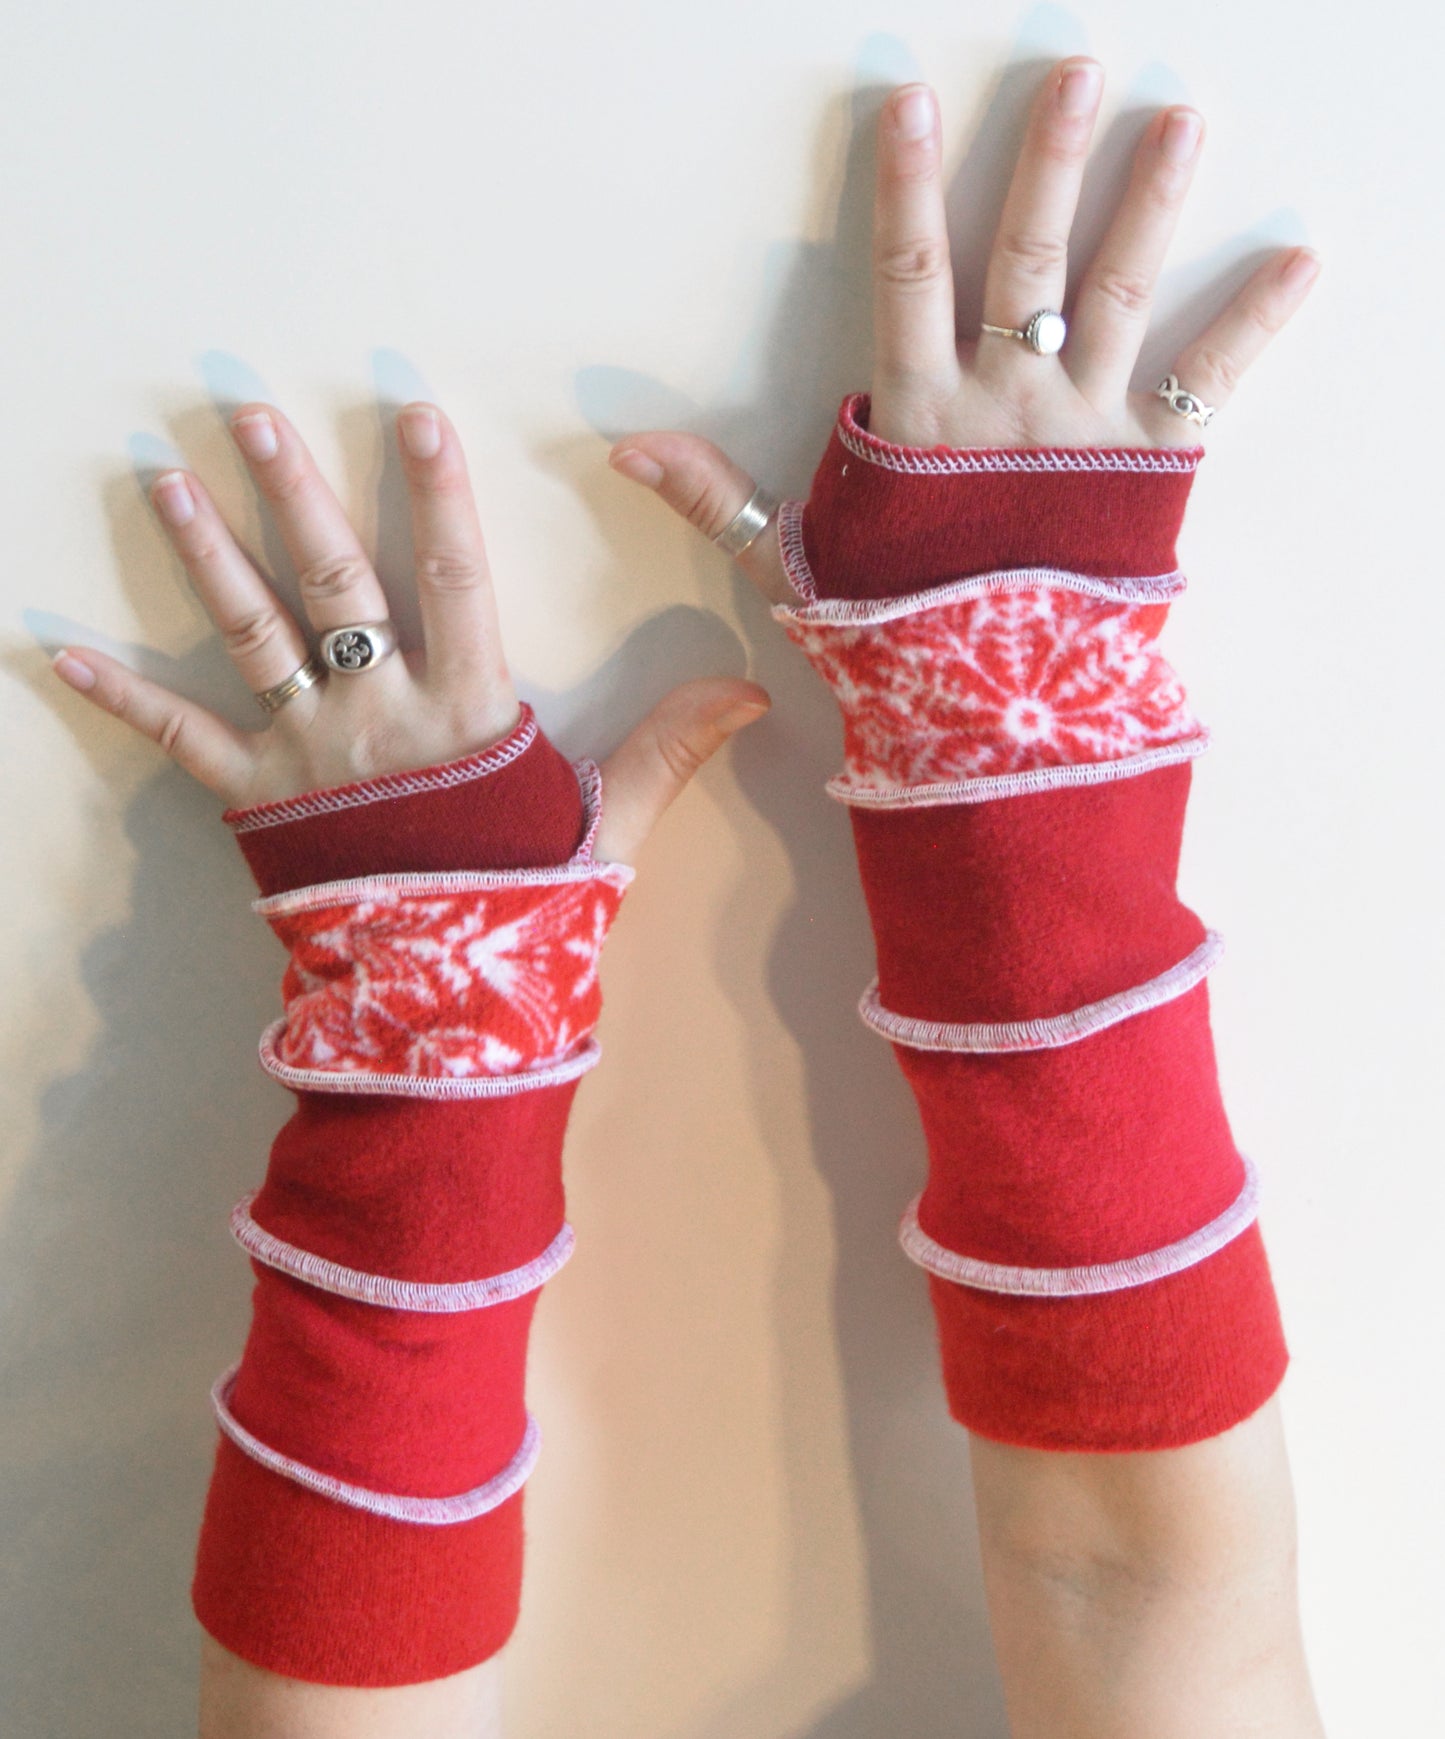 Katwise inspired needle-felted red snowflake Christmas theme wool upcycled sweater arm warmers-1314